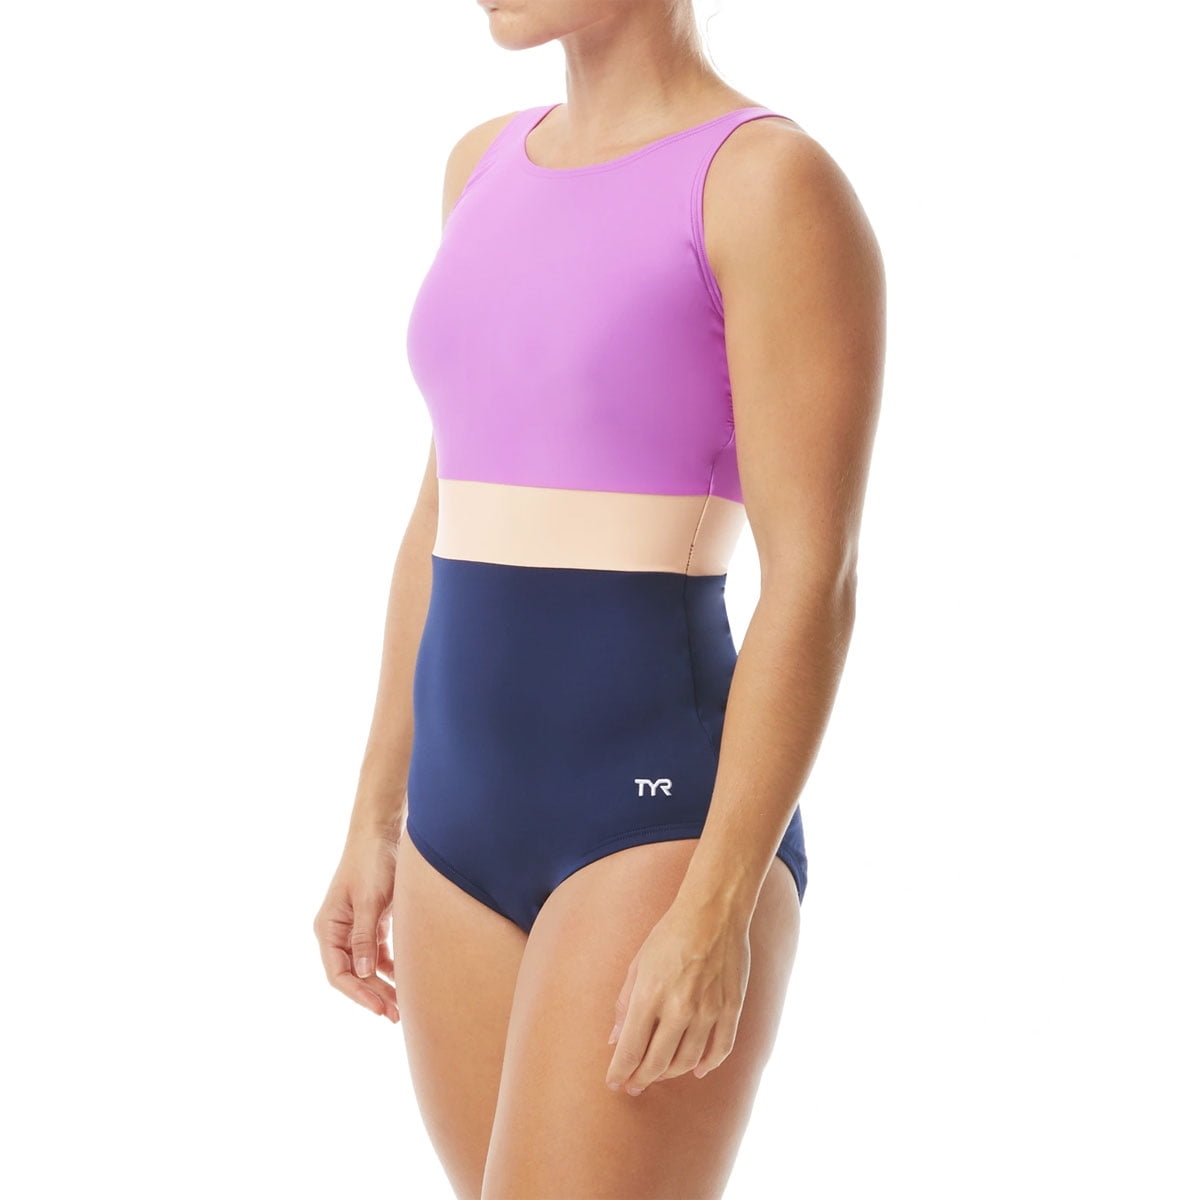 TYR TYR Women's Solid Splice Belted Controlfit Swimsuit